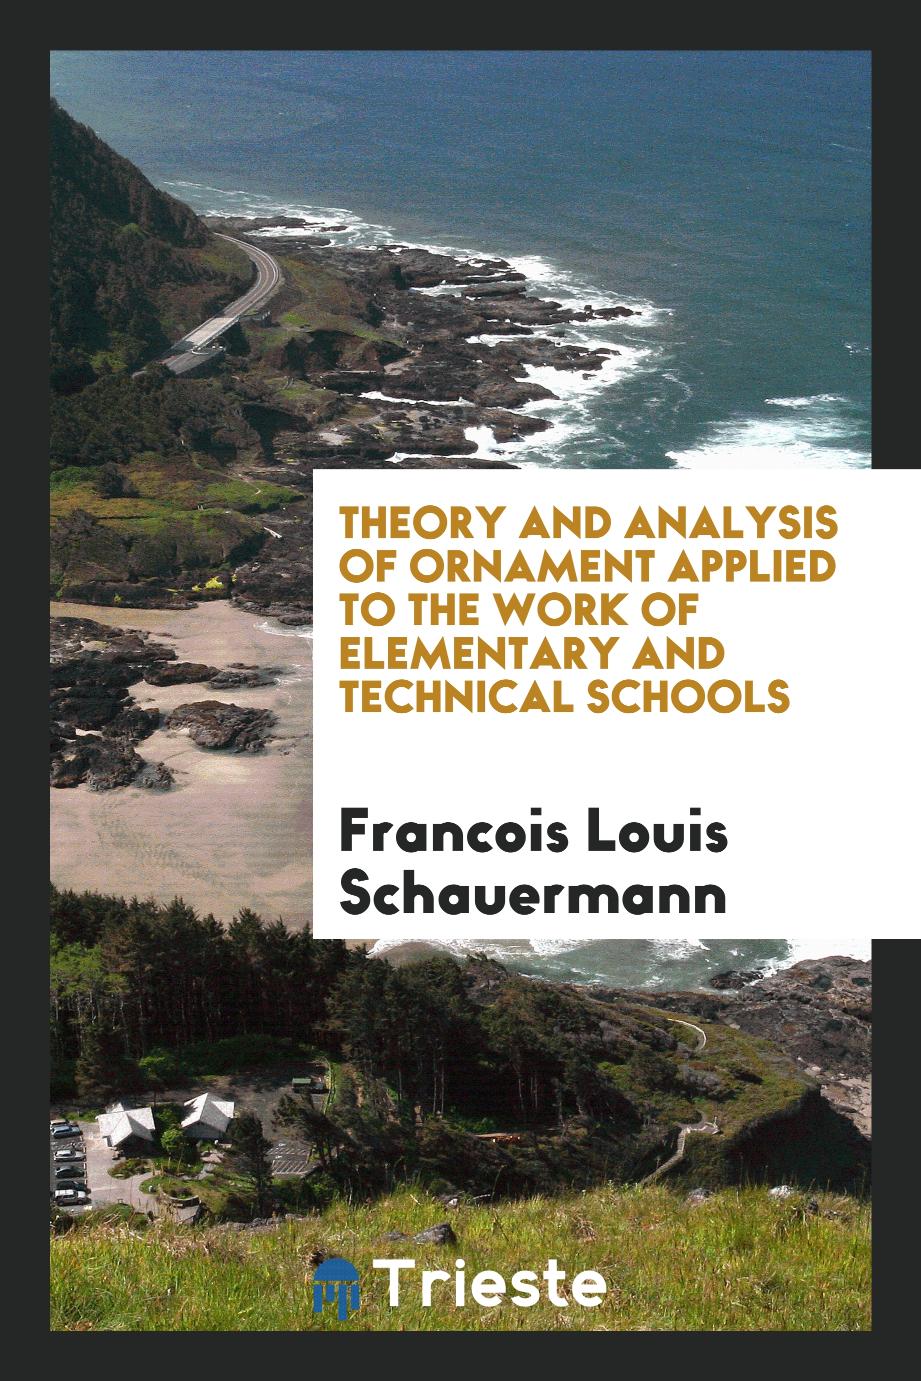 Theory and analysis of ornament applied to the work of elementary and technical schools